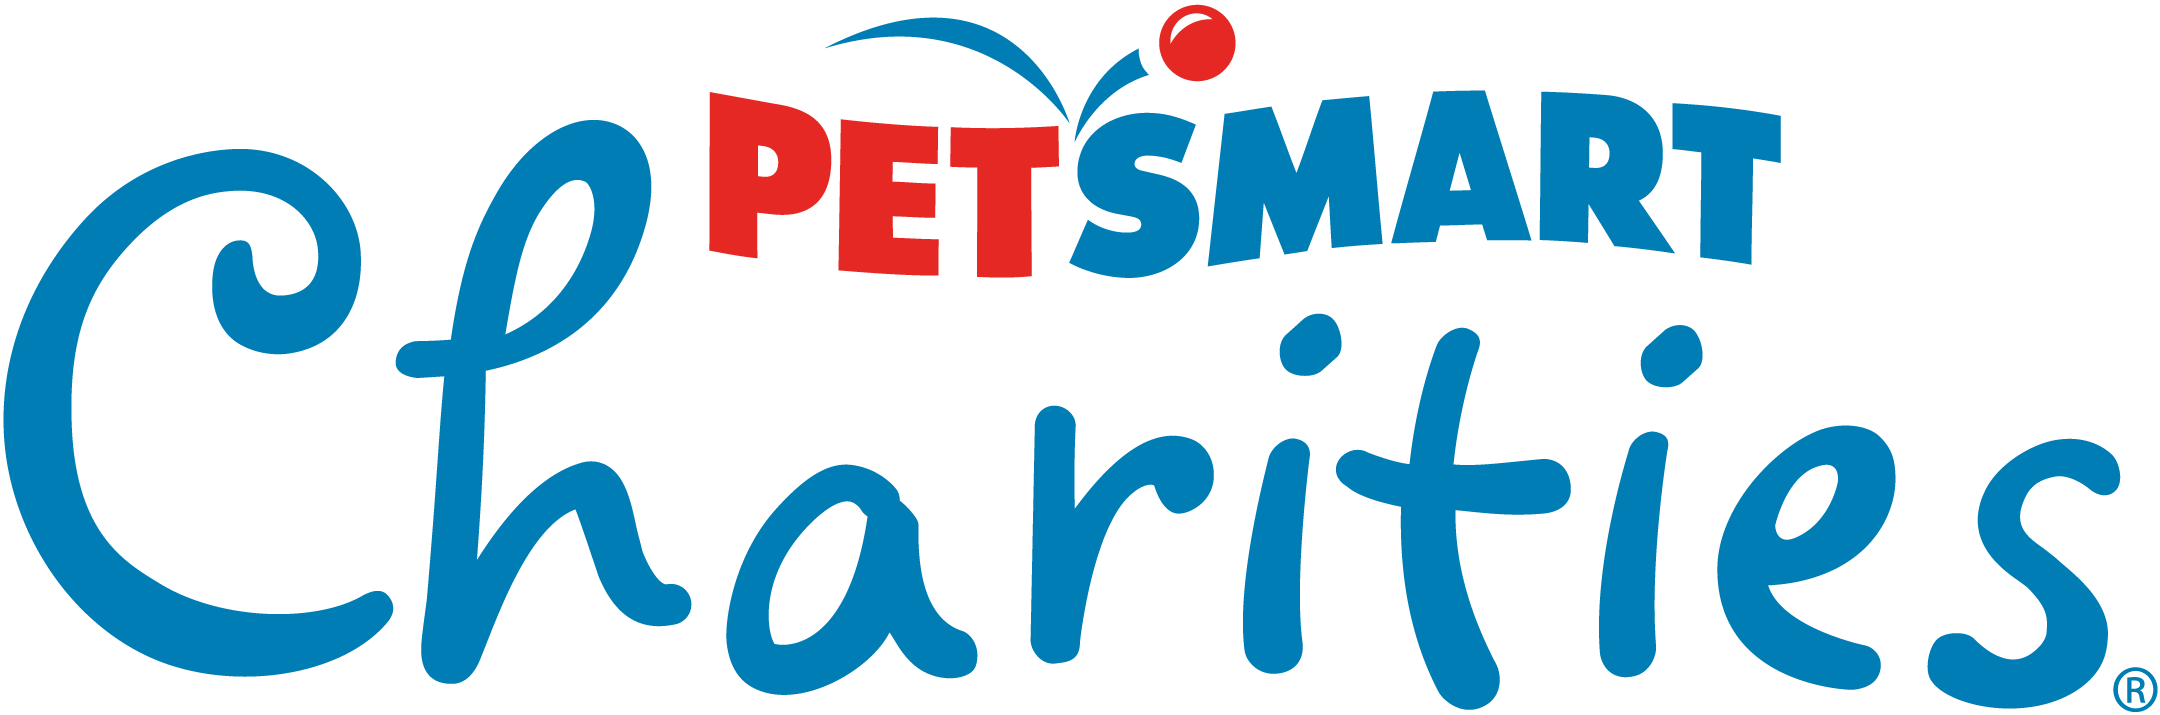 Petsmart Charities Logo - Blue and Red